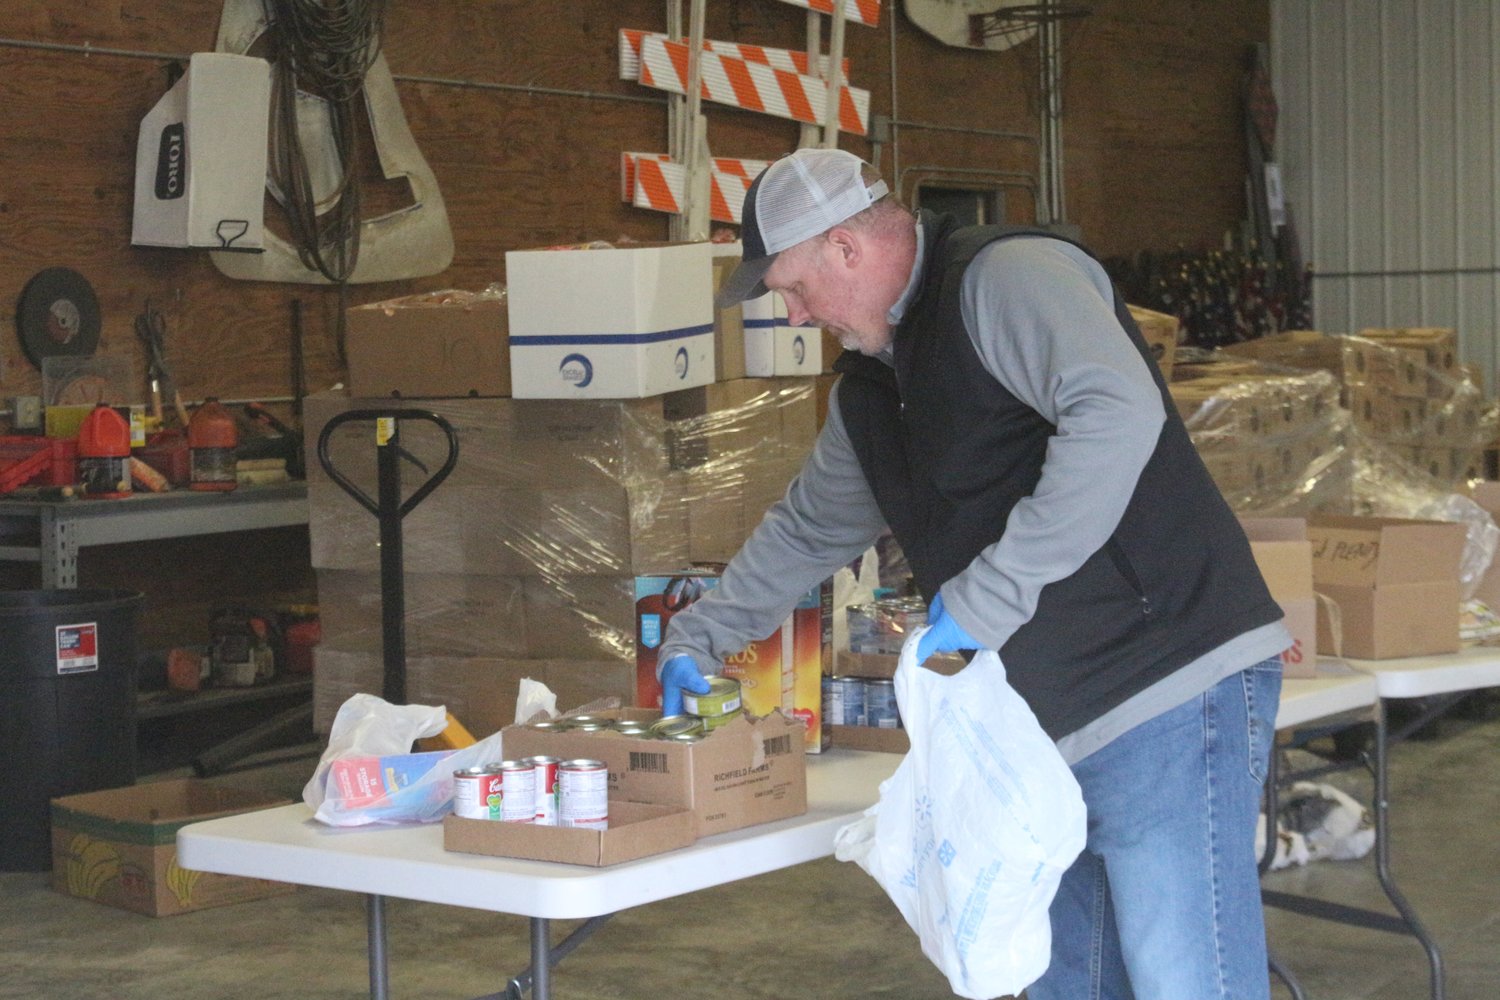 Kalona City Administrator Ryan Schlabaugh prepares bags of groceries at the city’s pop-up food pantry at the city shop on Saturday morning.